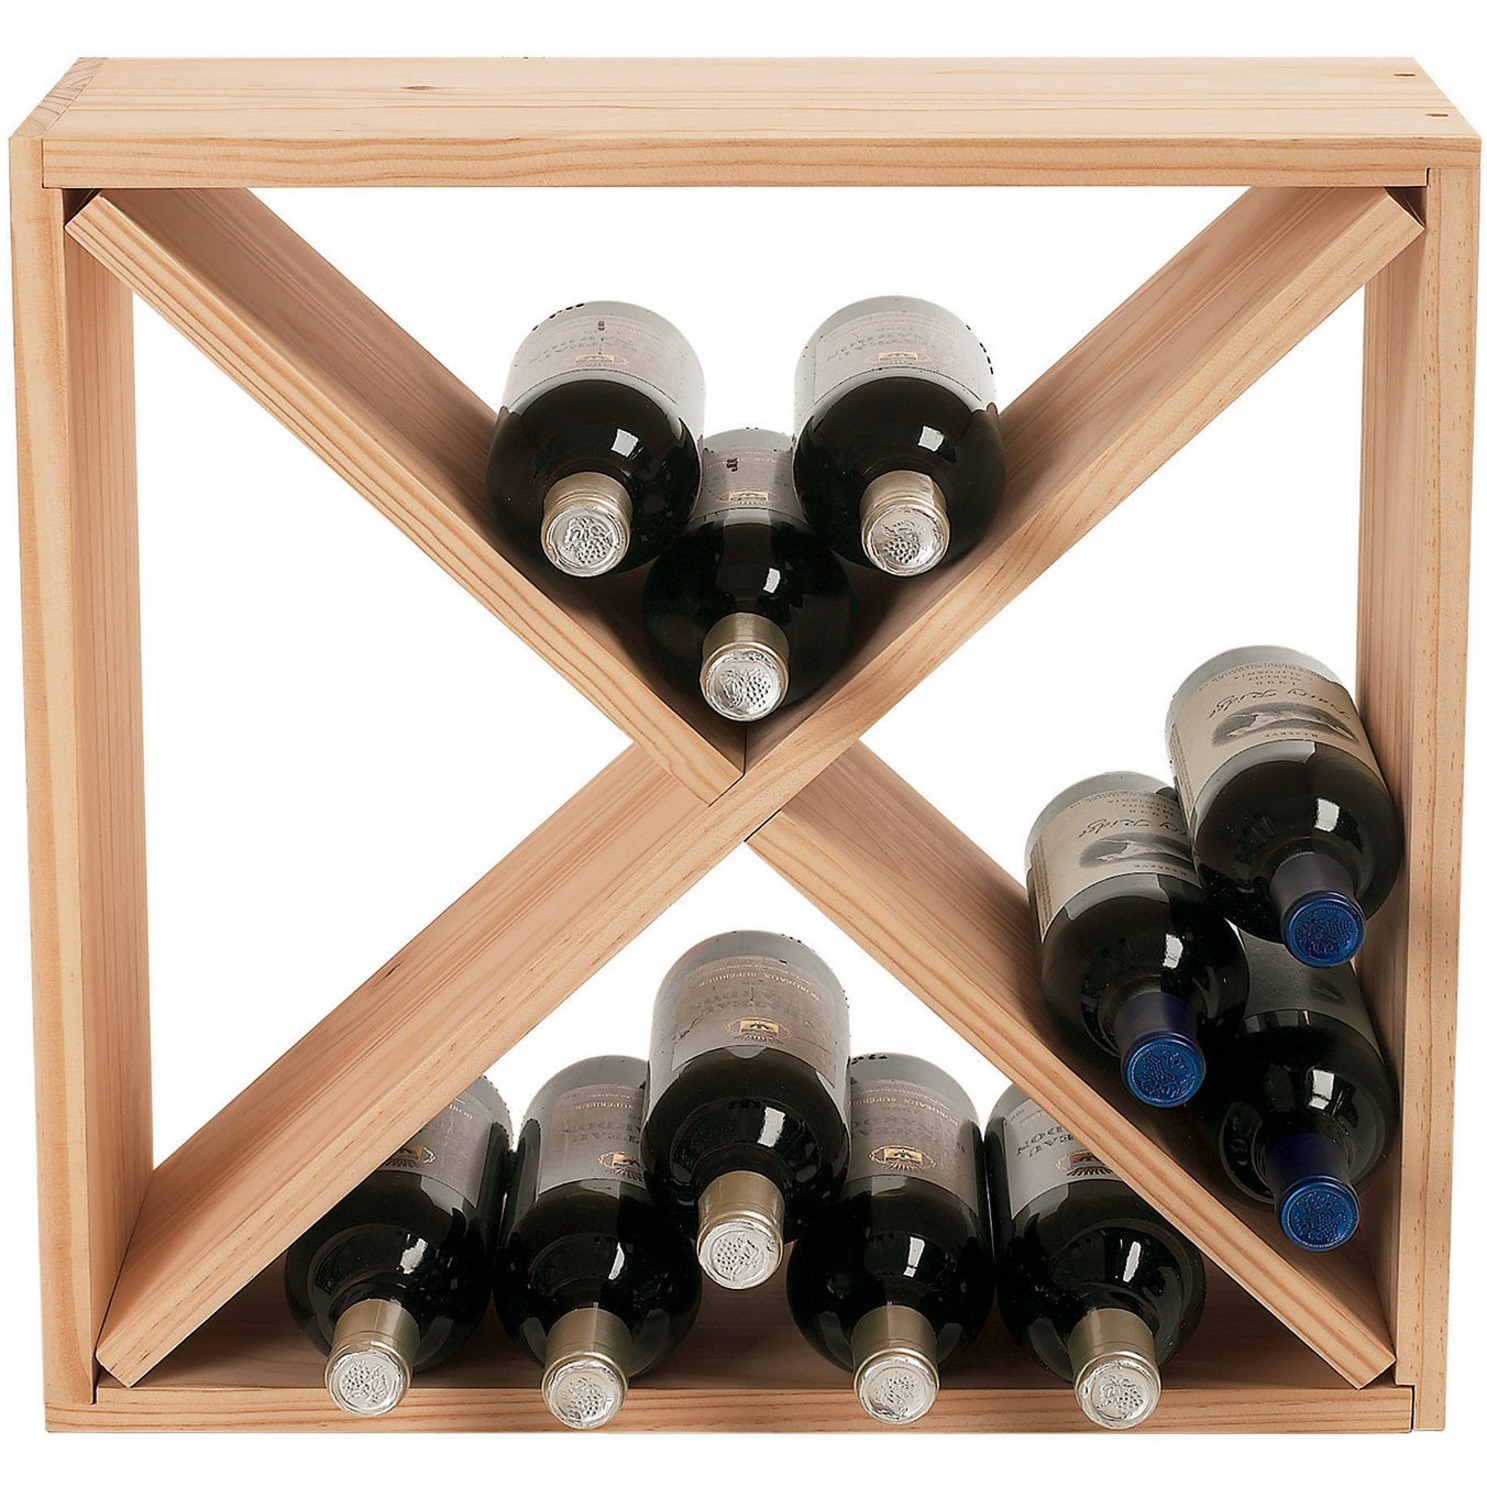 24 Bottle Compact Cellar Cube Wine Rack (Natural)